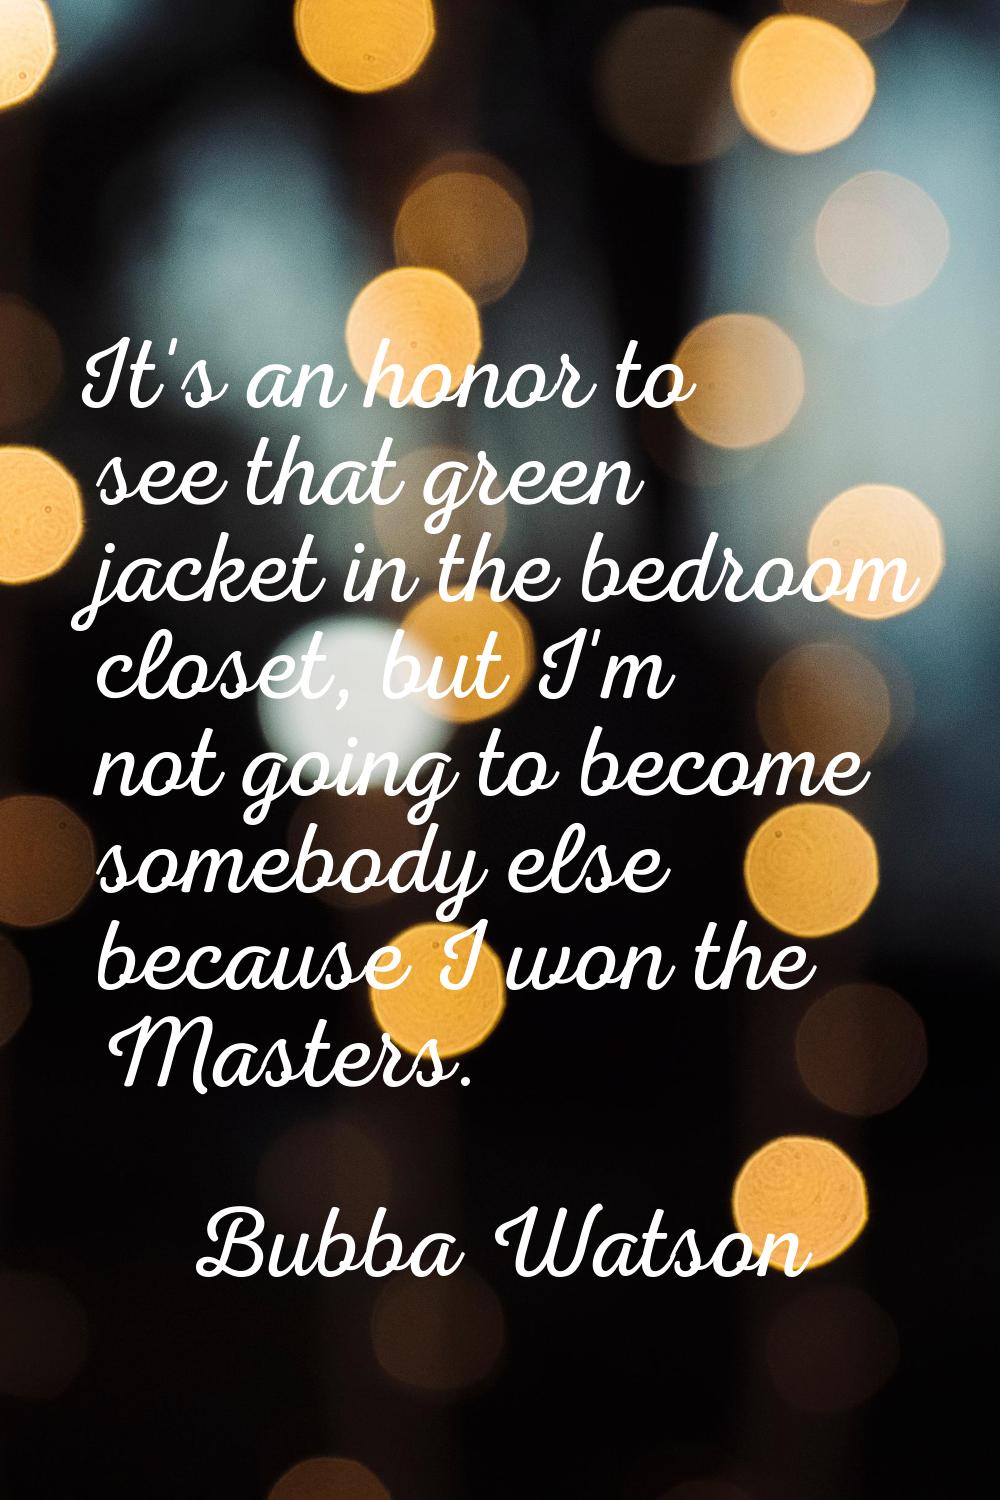 It's an honor to see that green jacket in the bedroom closet, but I'm not going to become somebody 